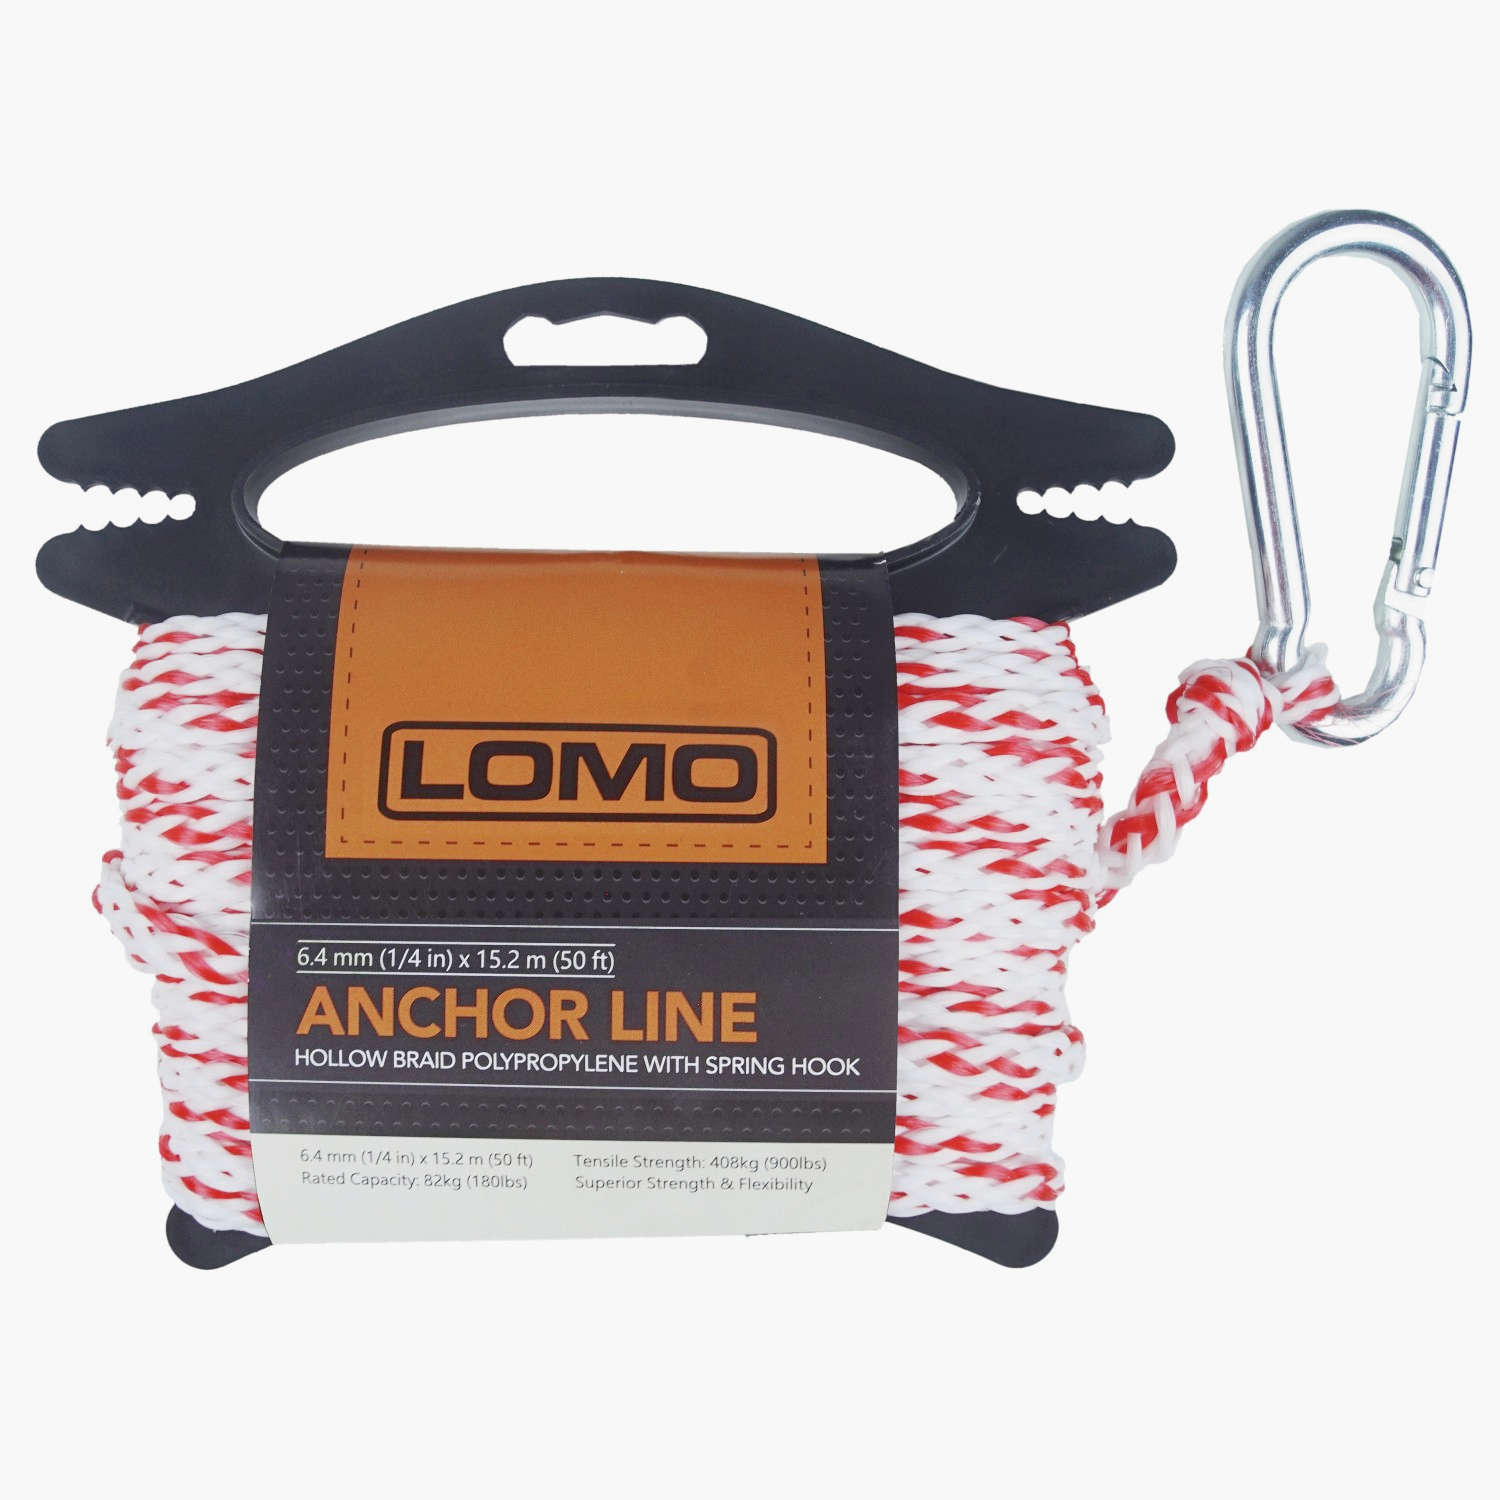 Anchor Line, 1/4 6mm x 50ft 15m Hollow Braid Polypropylene with